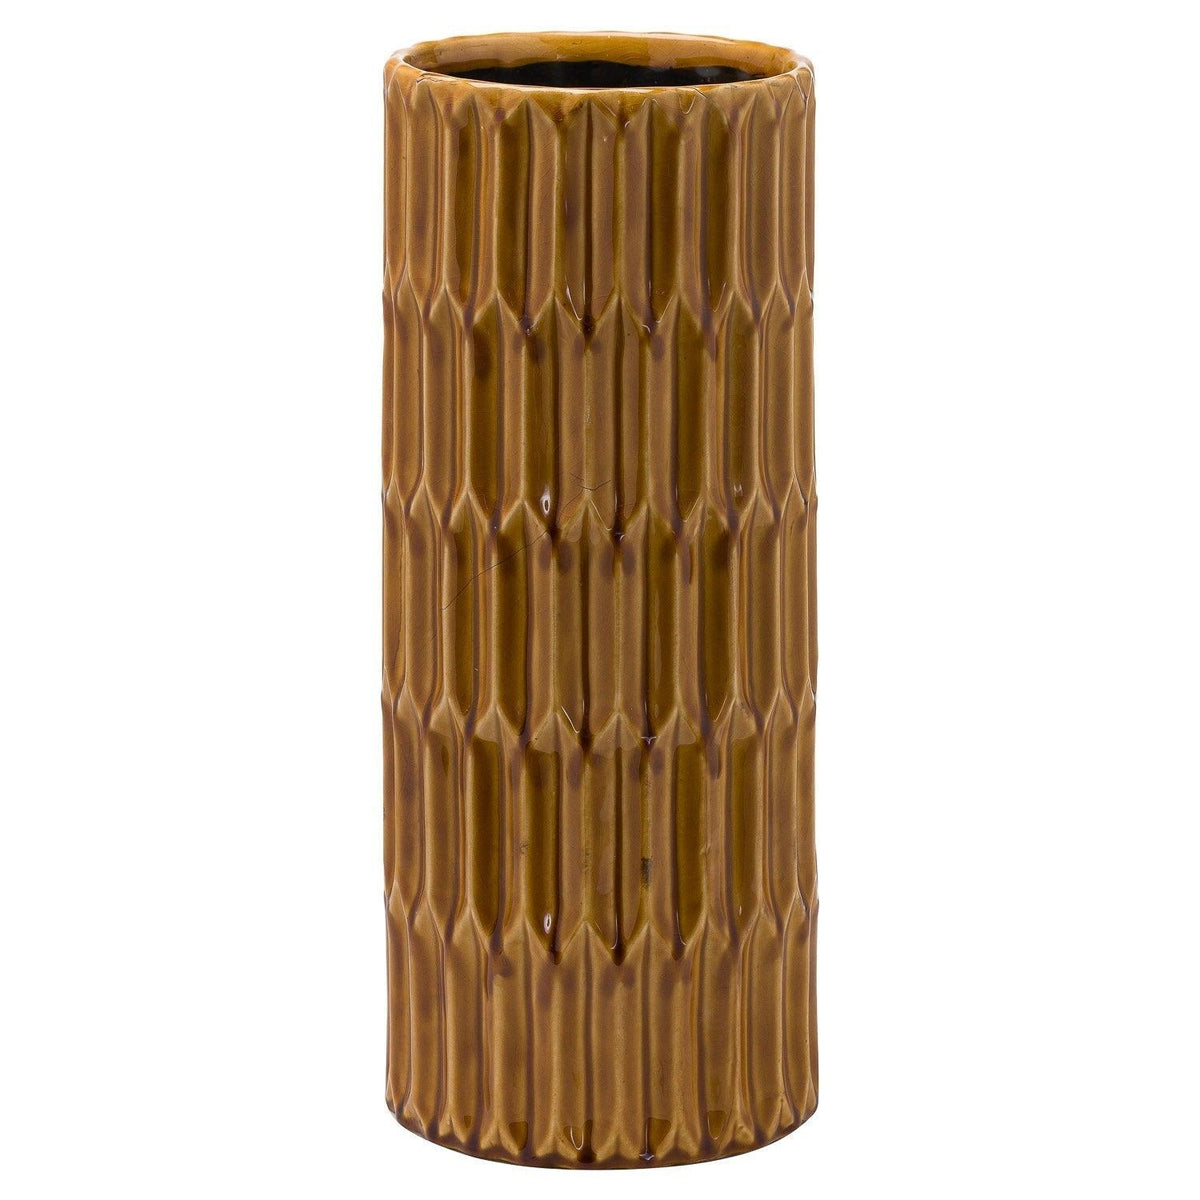 Seville Collection Lustre Umbrella Stand - Vookoo Lifestyle